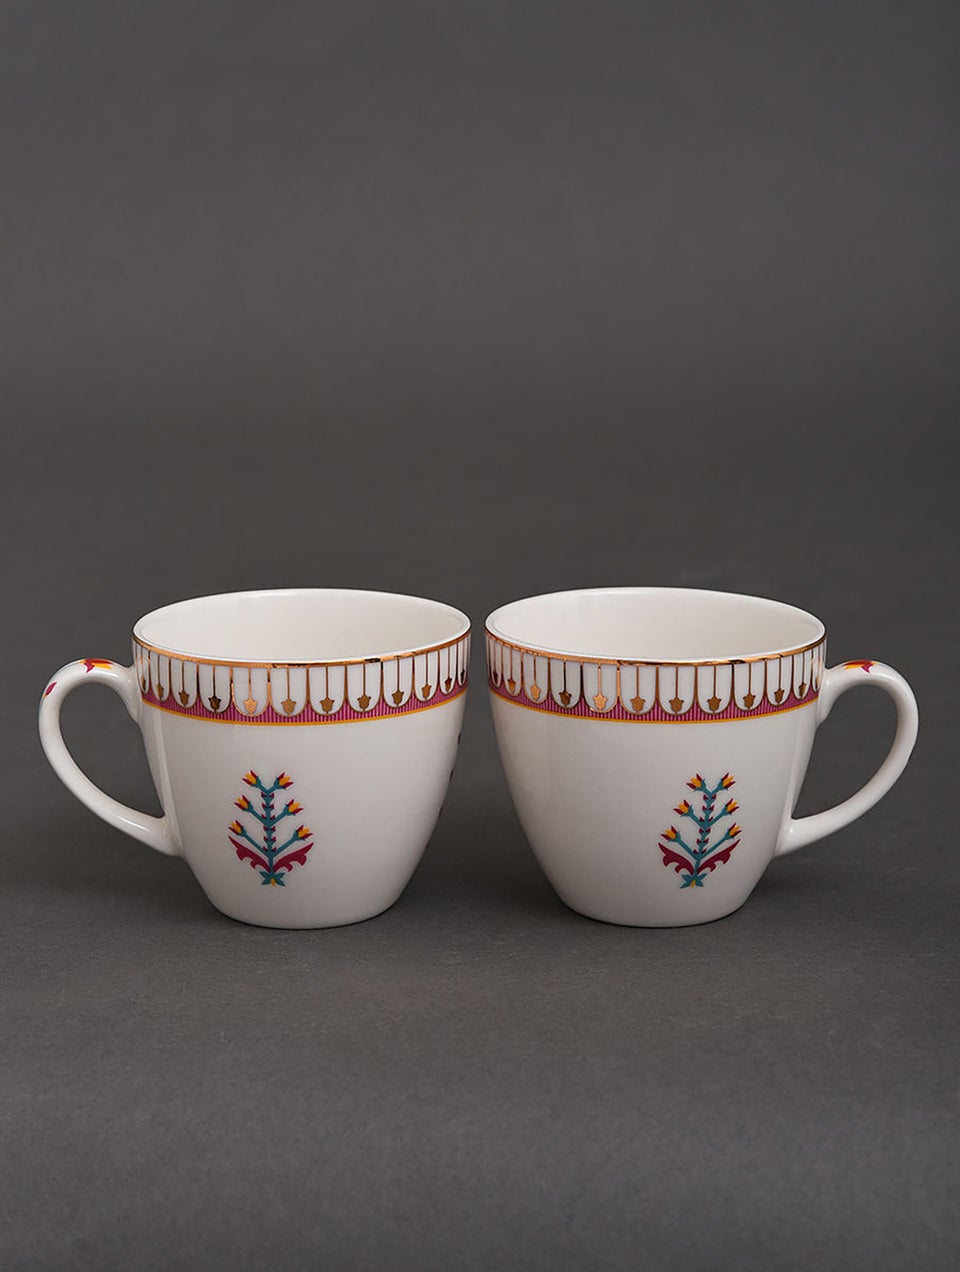 Handcrafted Porcelain Paithan Tea Cups With 24 Karat Gold Work In A Gift Box